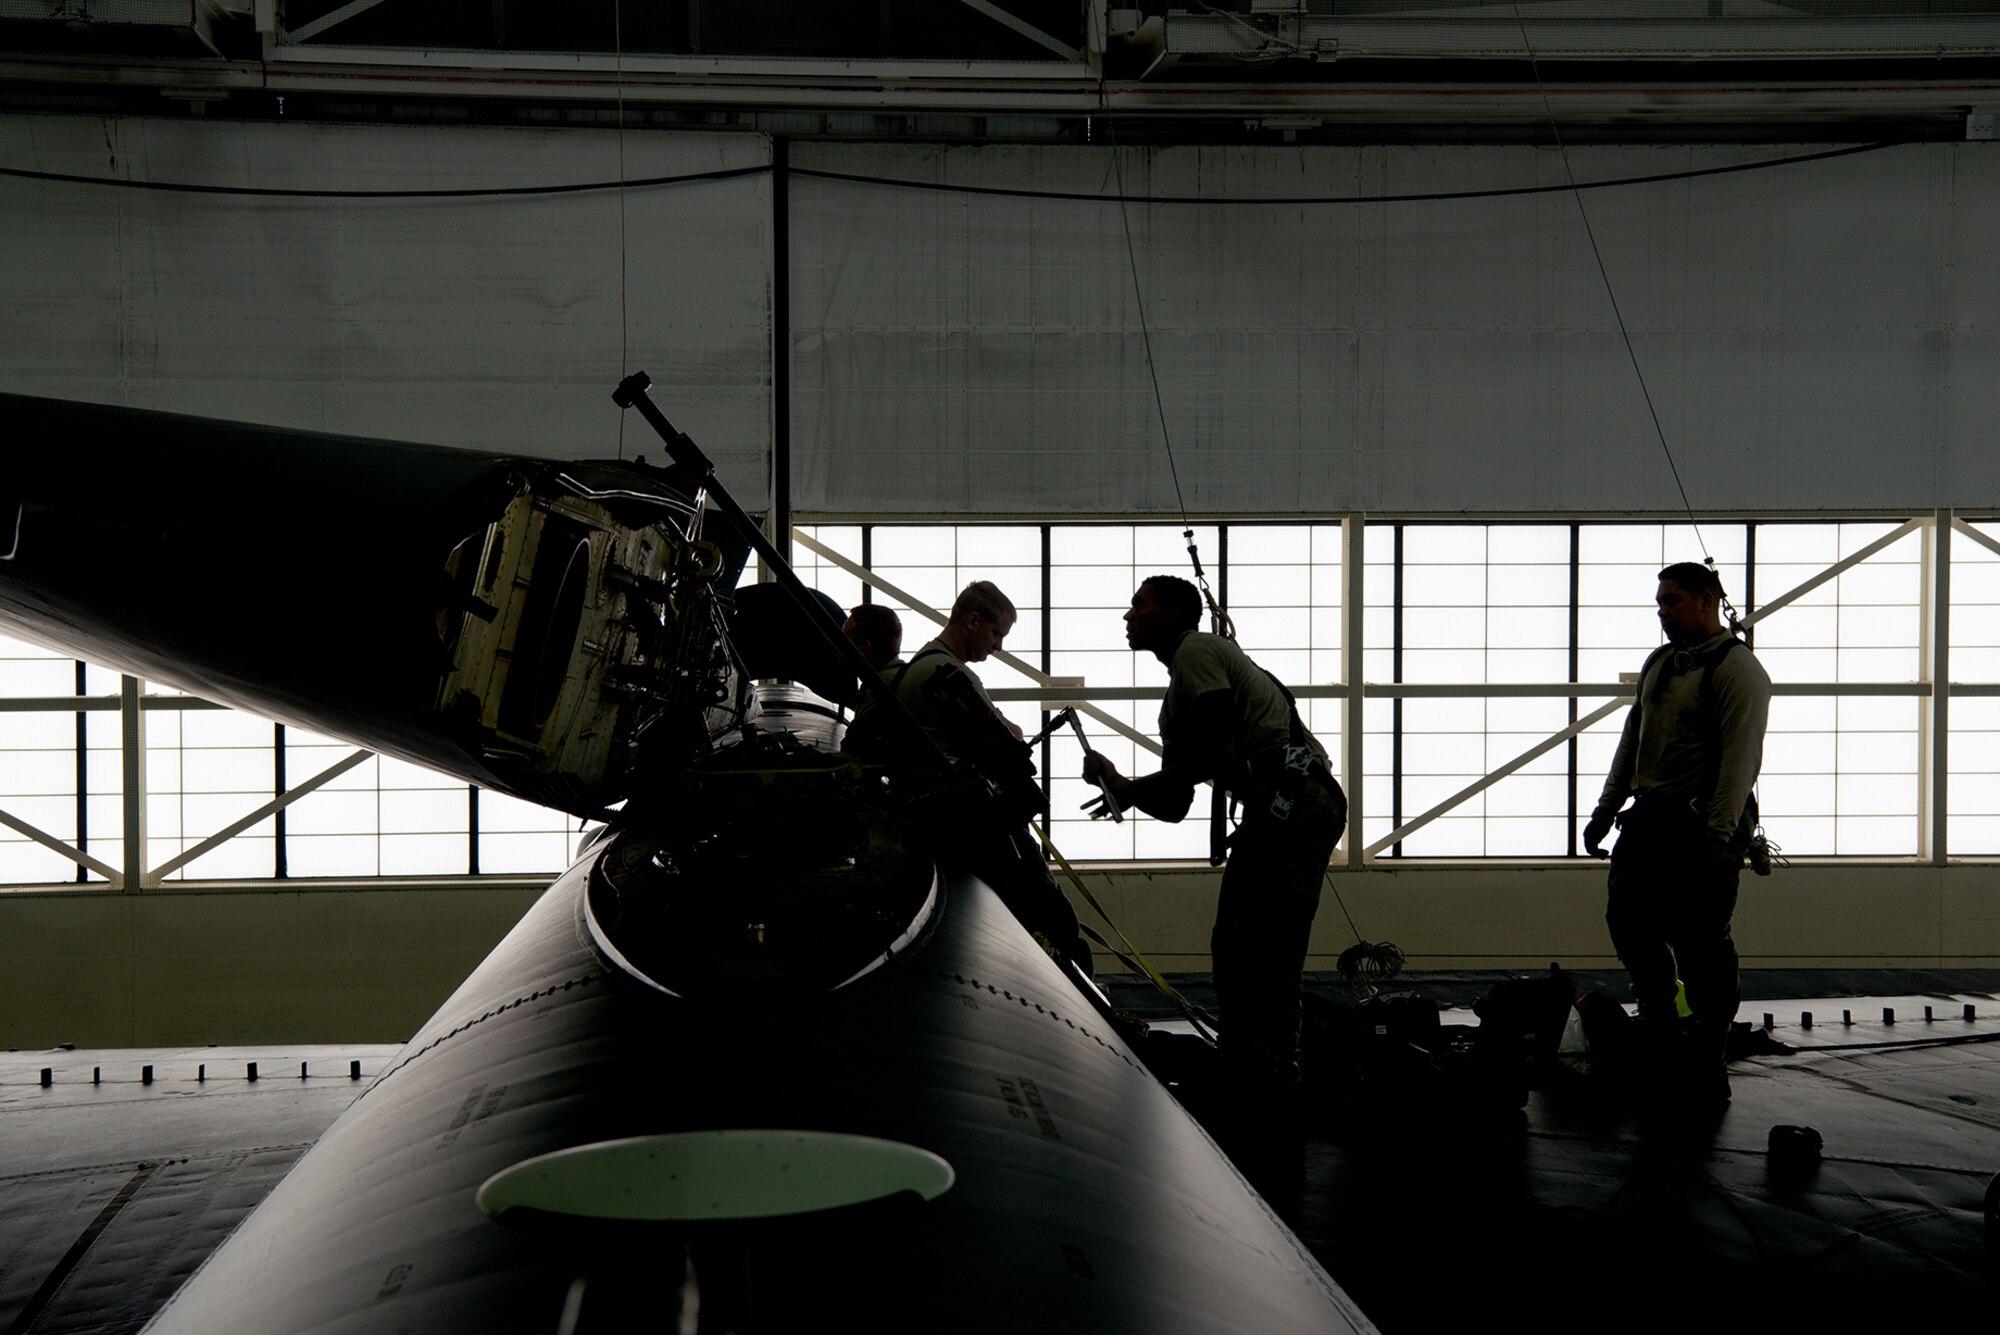 Crew chiefs assigned to the 5th Maintenance Squadron lower the vertical stabilizer on a B-52H Stratofortress at Minot Air Force Base, North Dakota, Feb. 10, 2019.